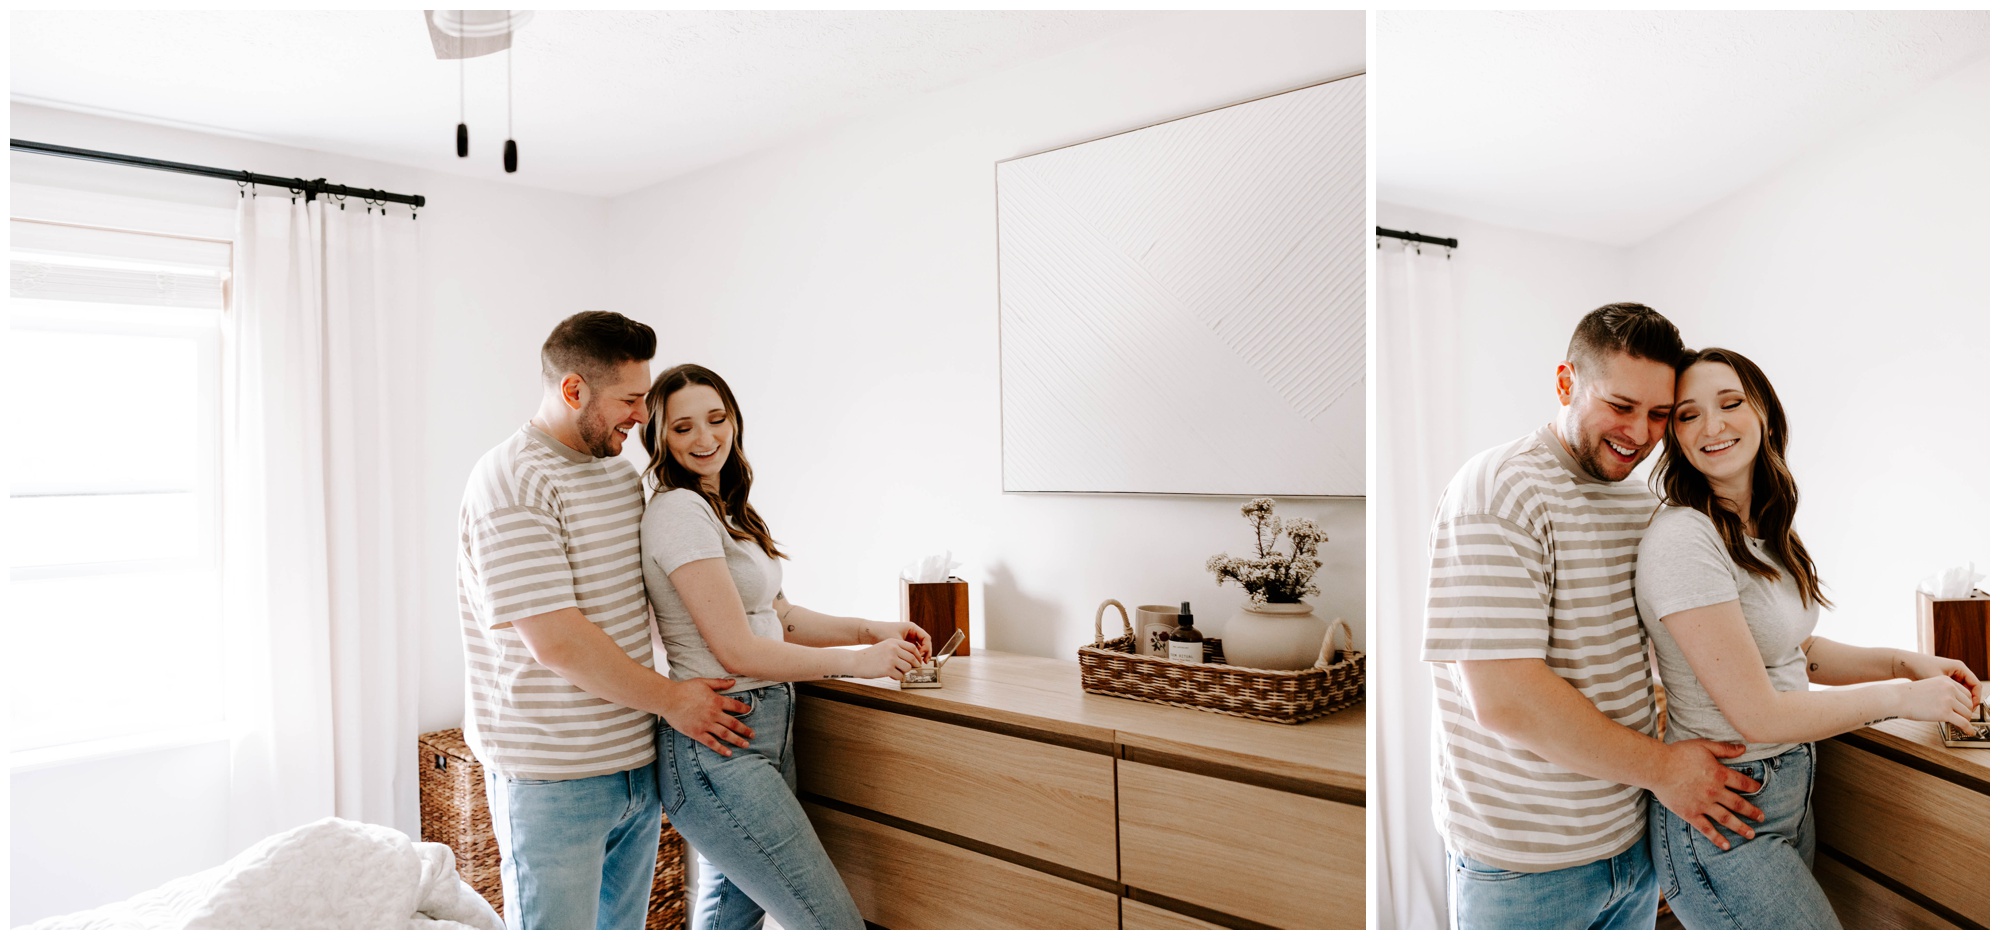 at home photoshoot for couples by Rachel Wehan Photography